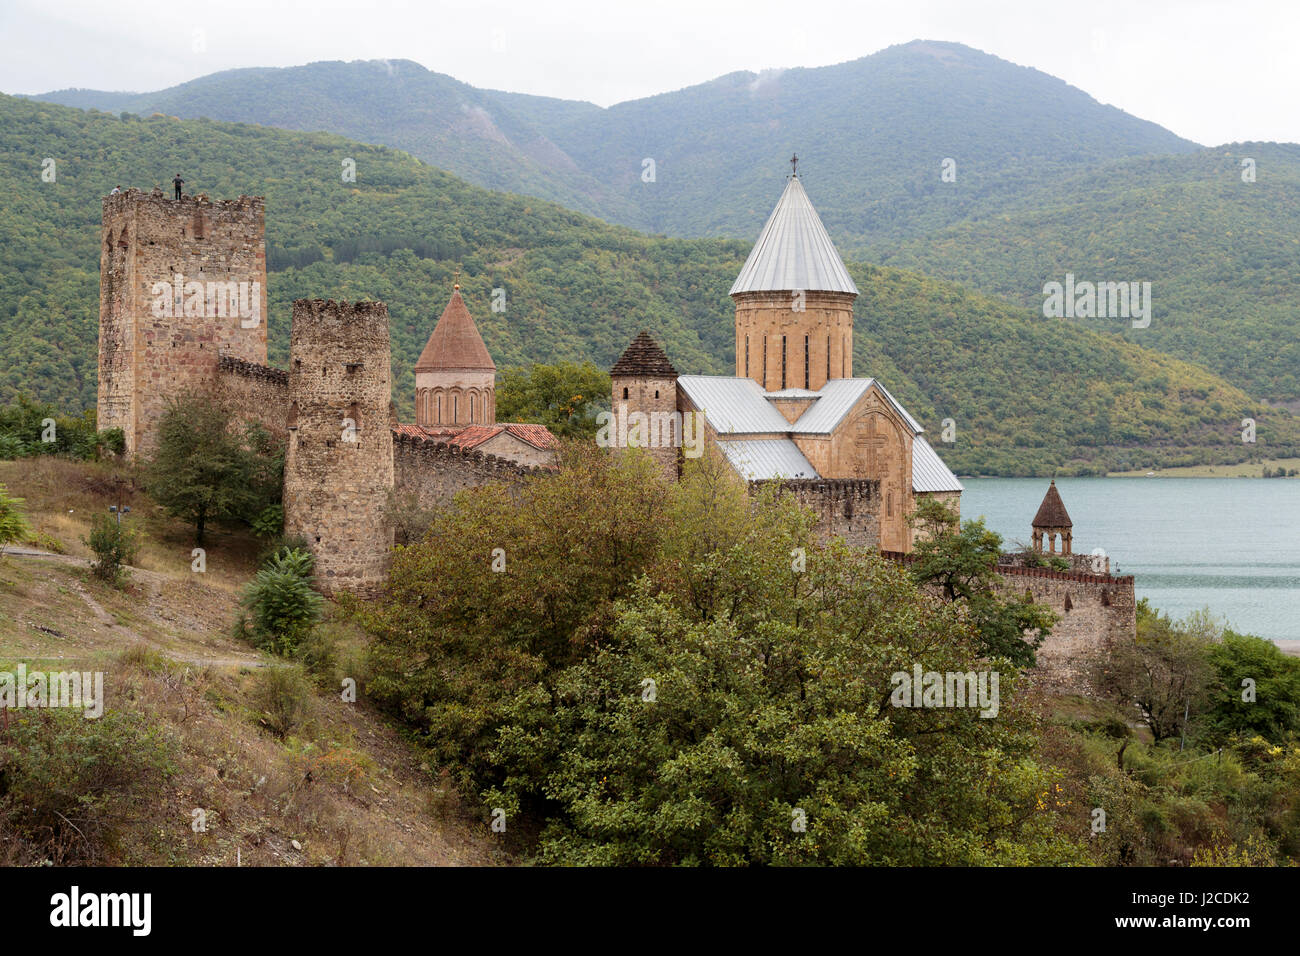 Georgia, Aragvi. The Ananuri Castle complex with the Aragvi river behind it. Stock Photo